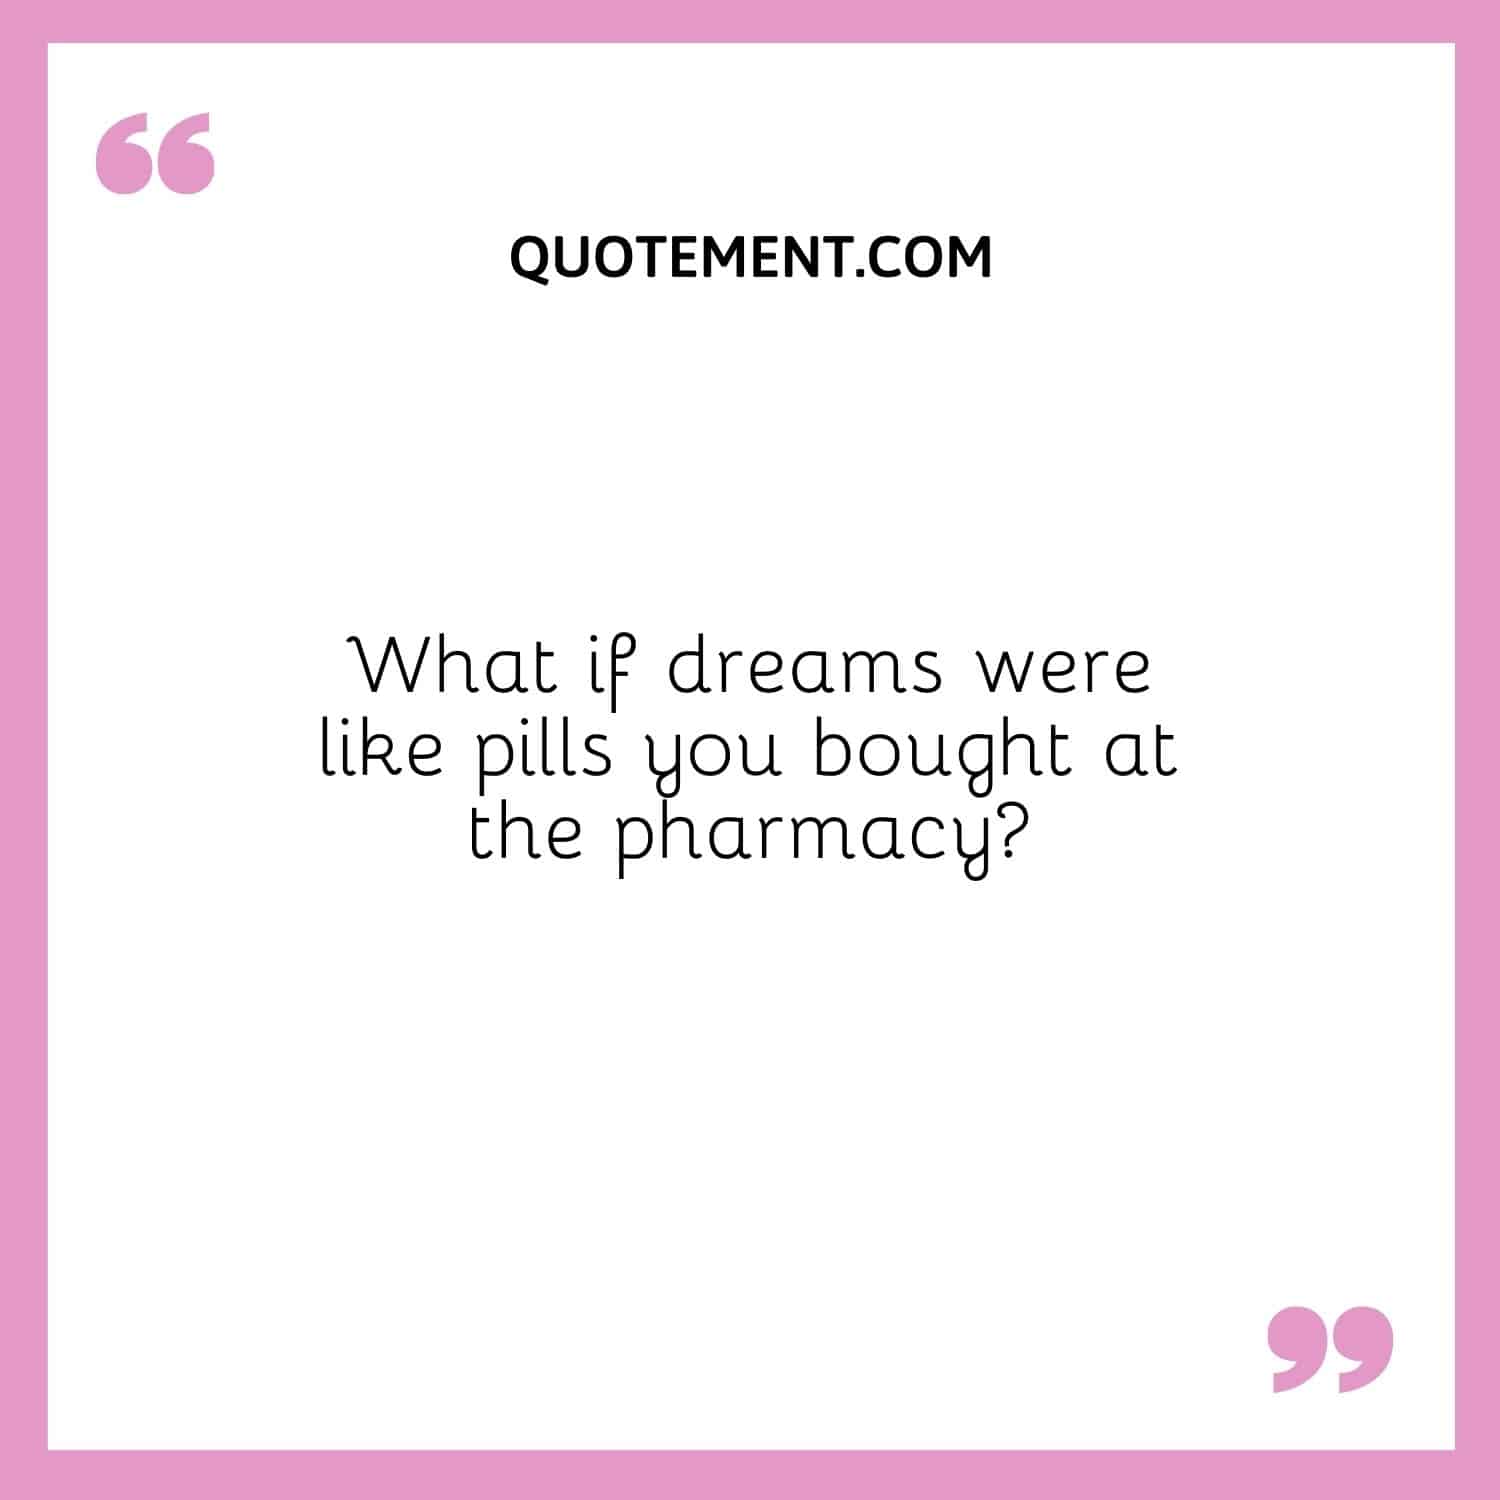 What if dreams were like pills you bought at the pharmacy